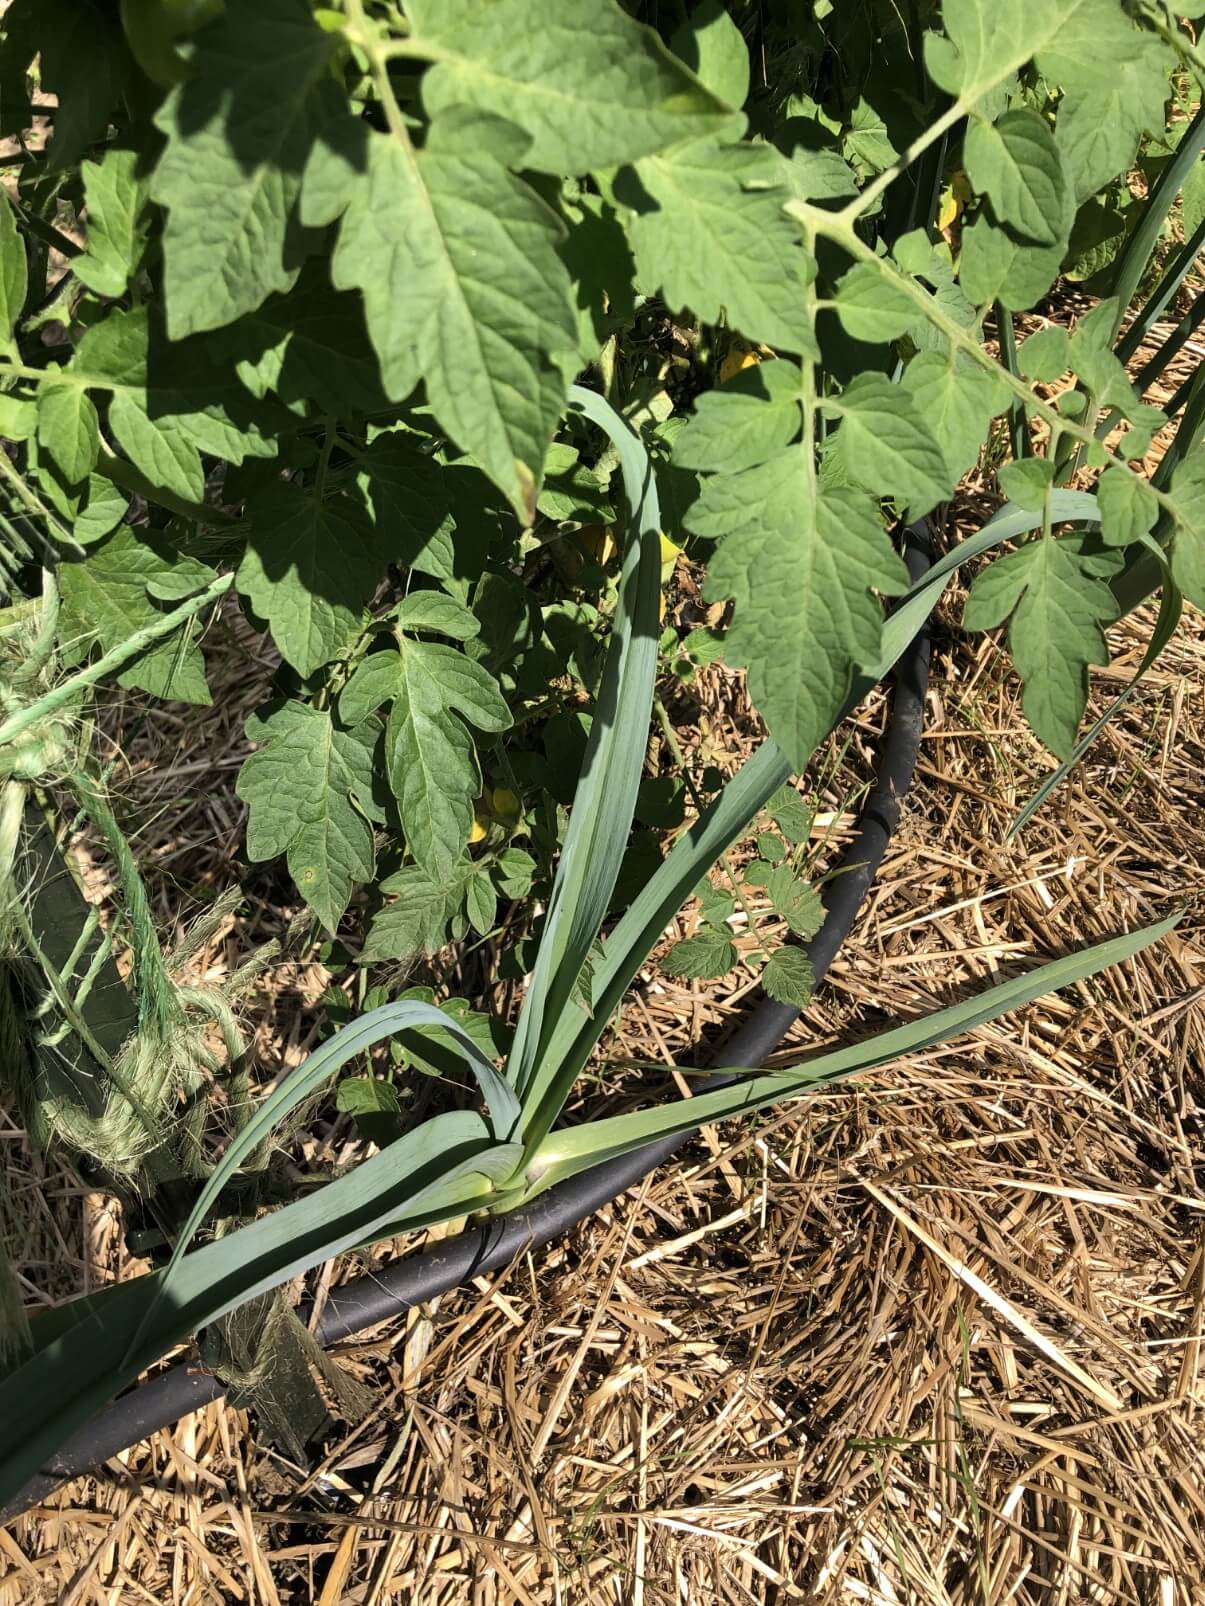 garlic growing next to tomato plant in companion planting